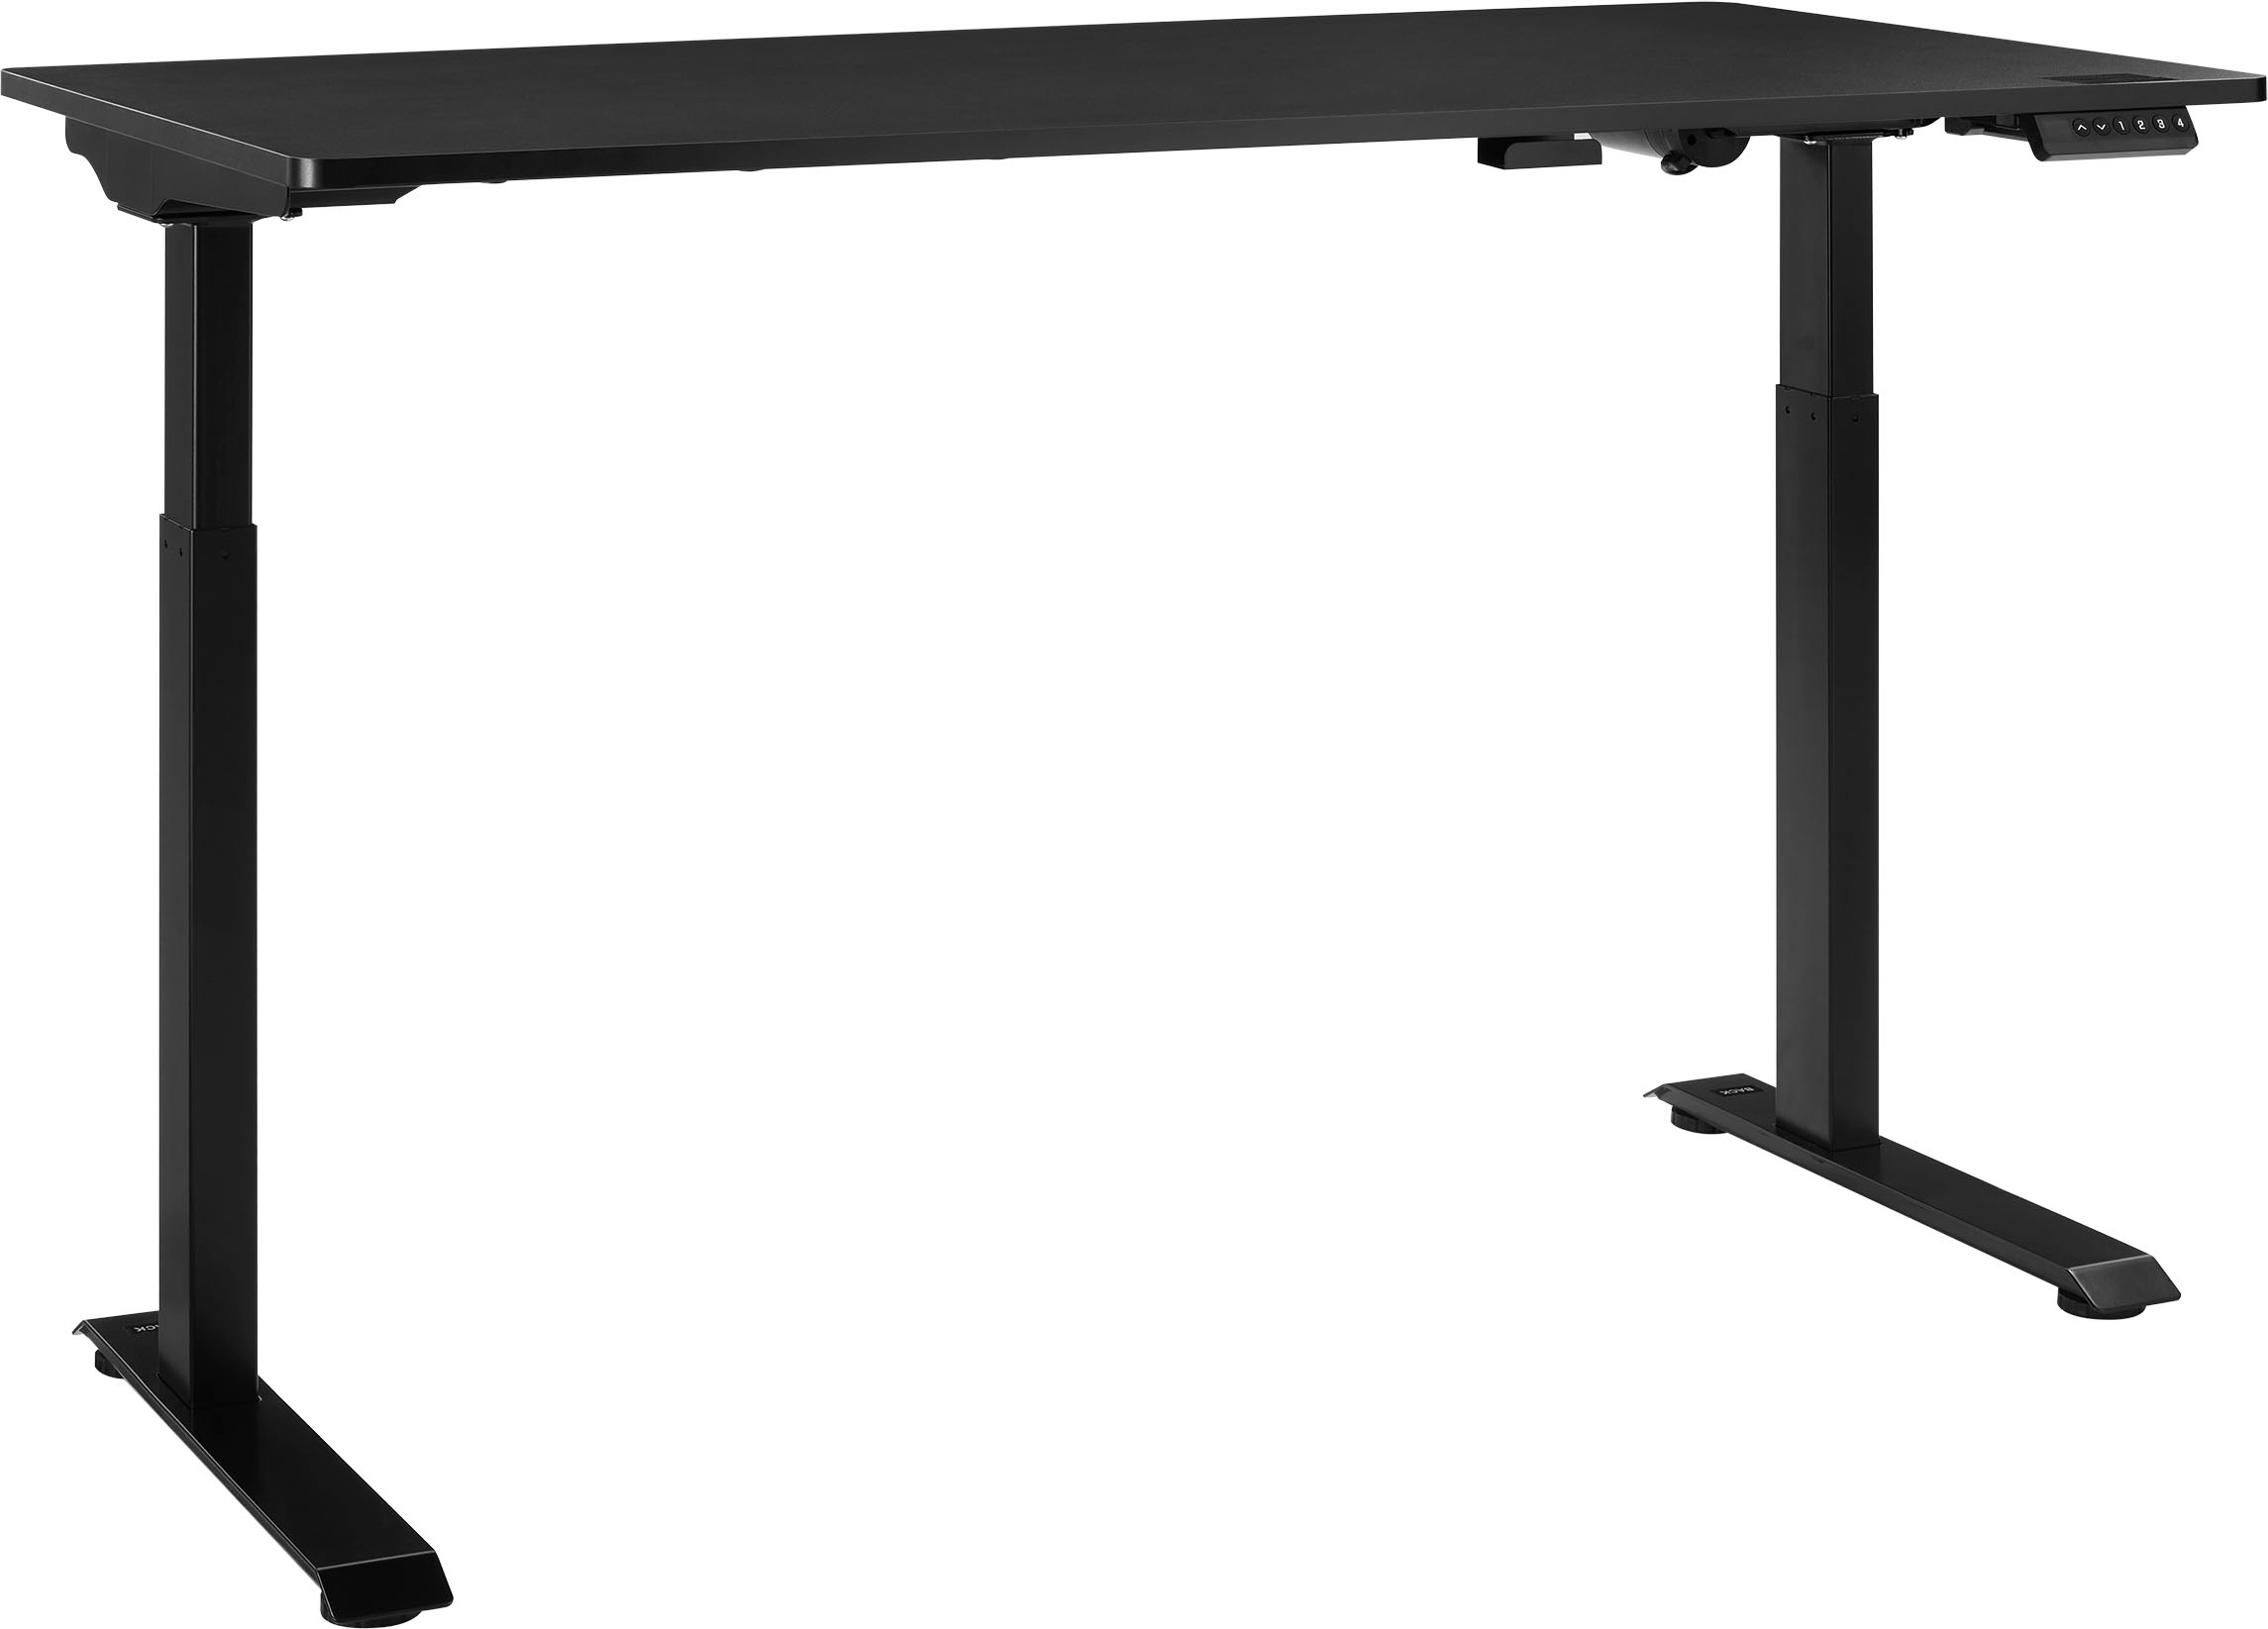 Angle View: Insignia™ - Adjustable Standing Desk with Electronic Controls - 55.1" wide - Black